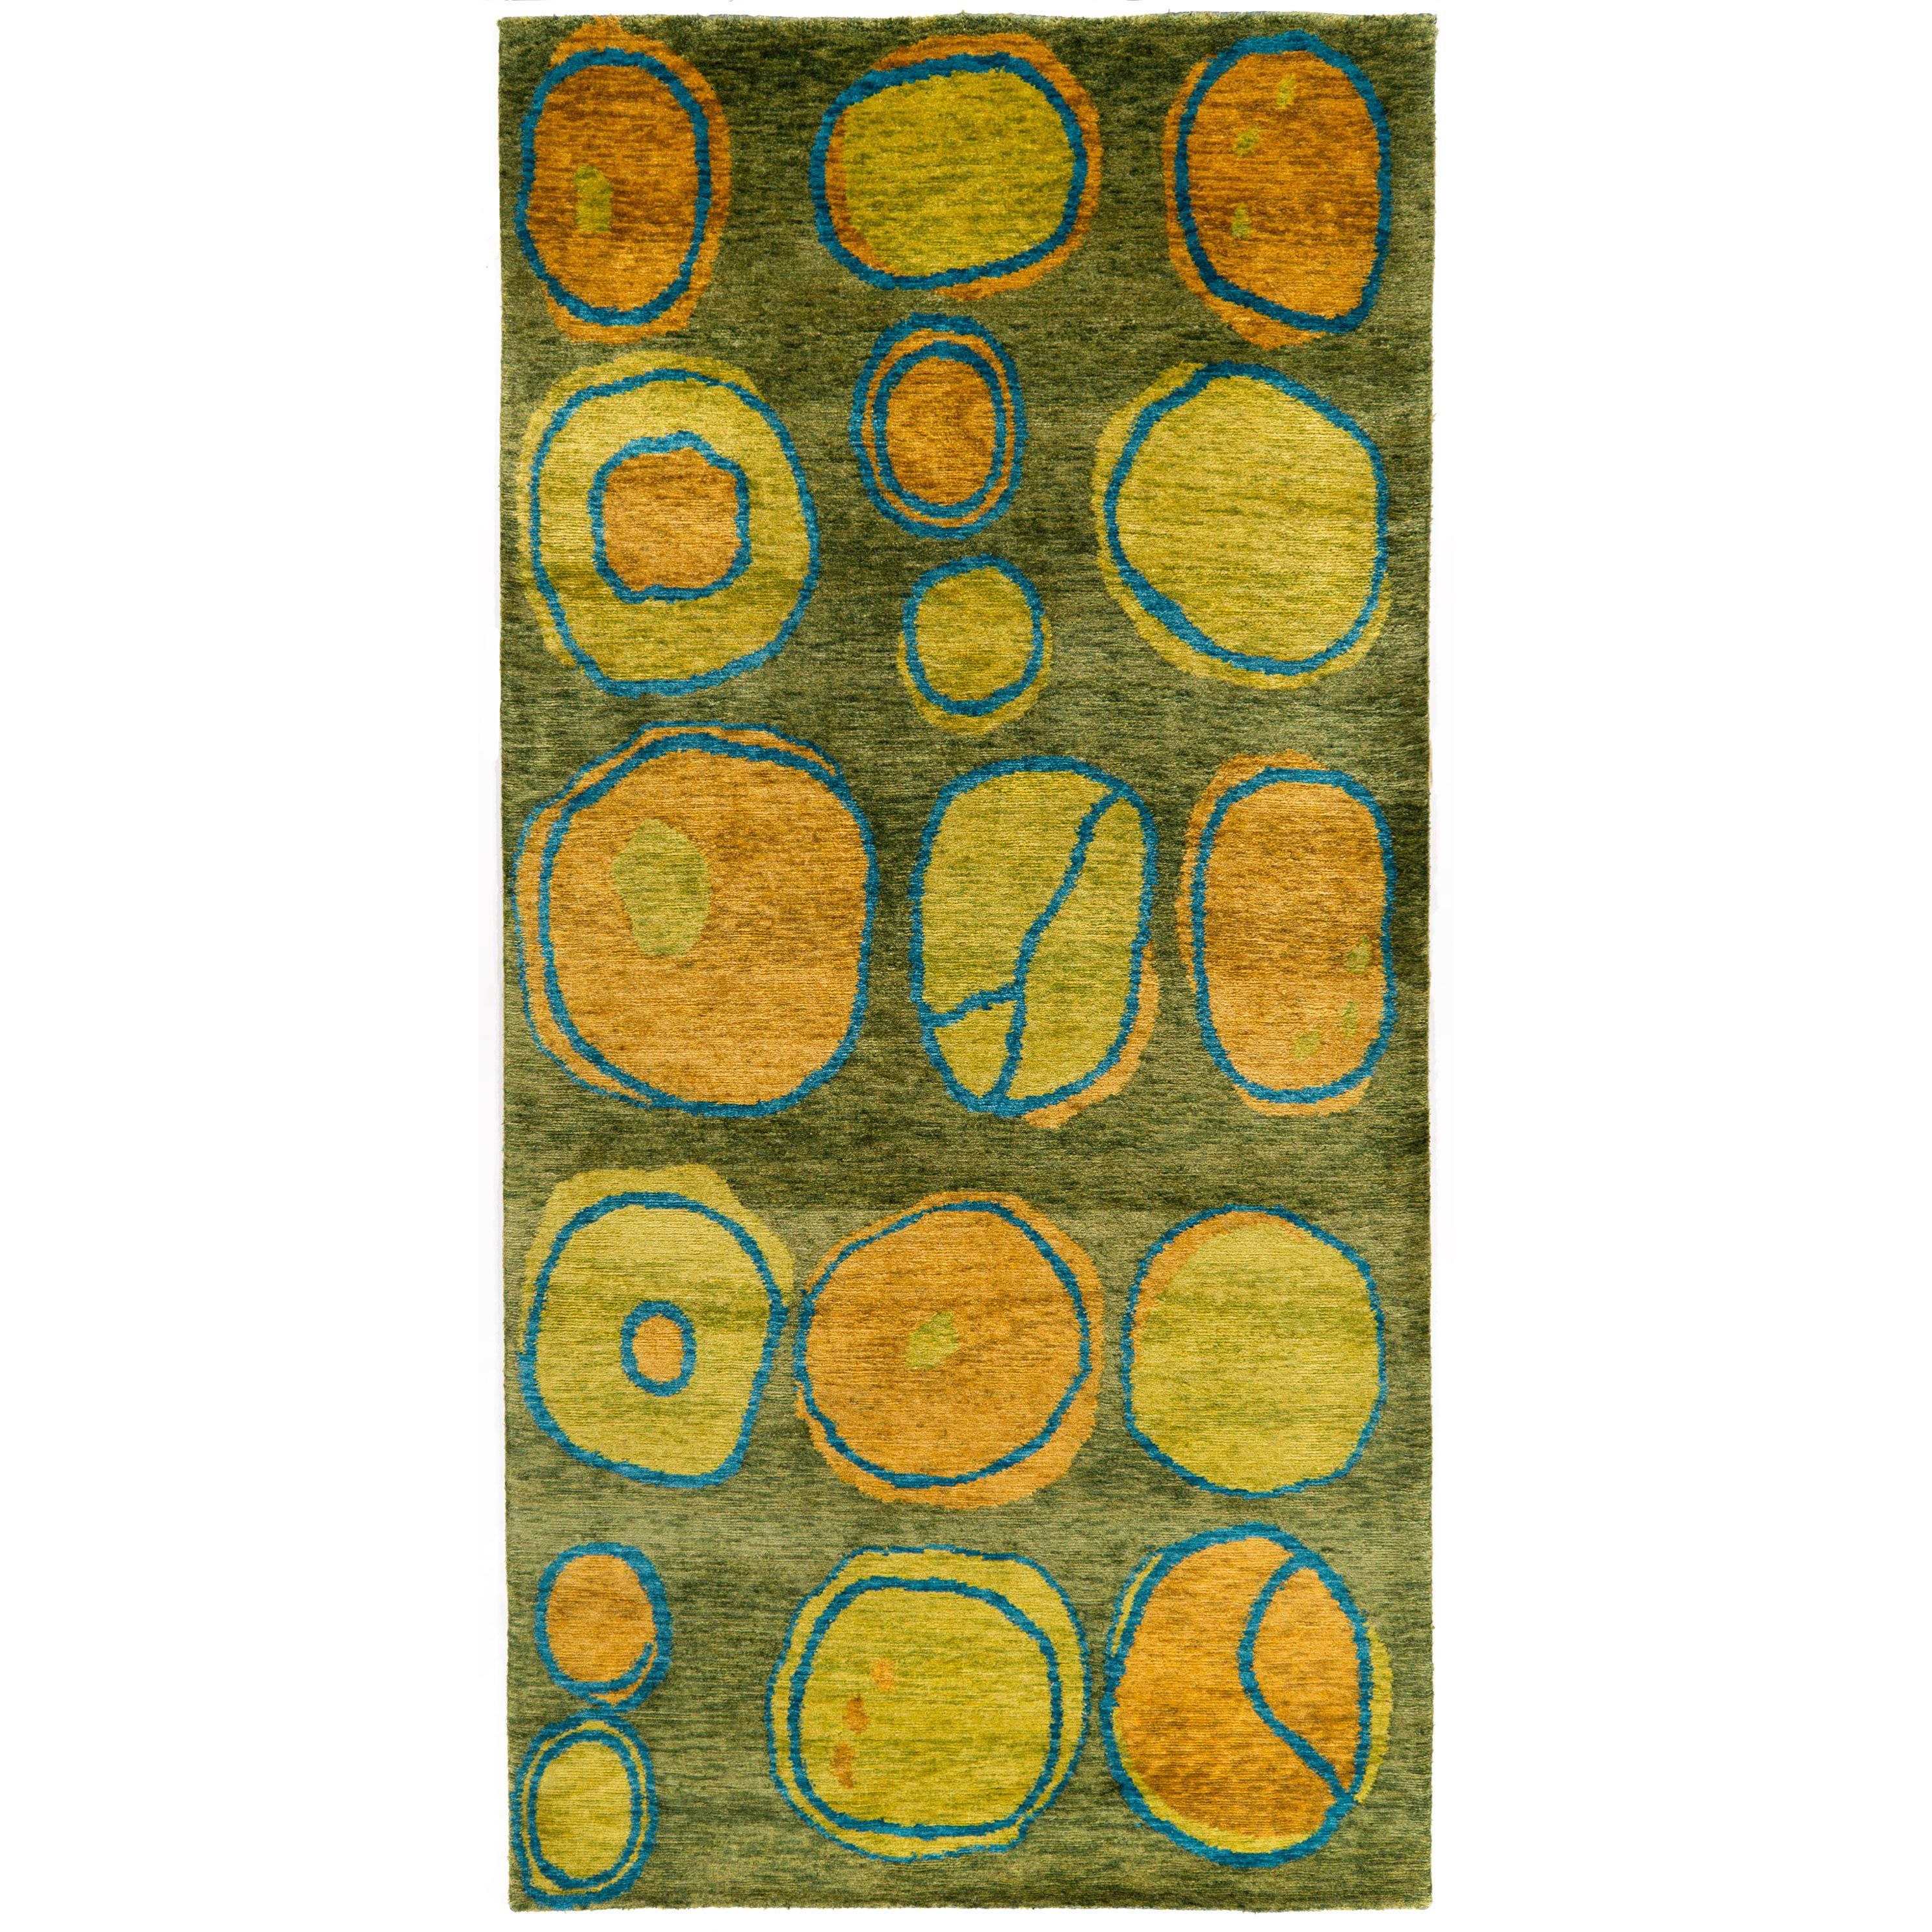 Wool And Silk Modernist Area Rug From Nepal 3x6 For Sale